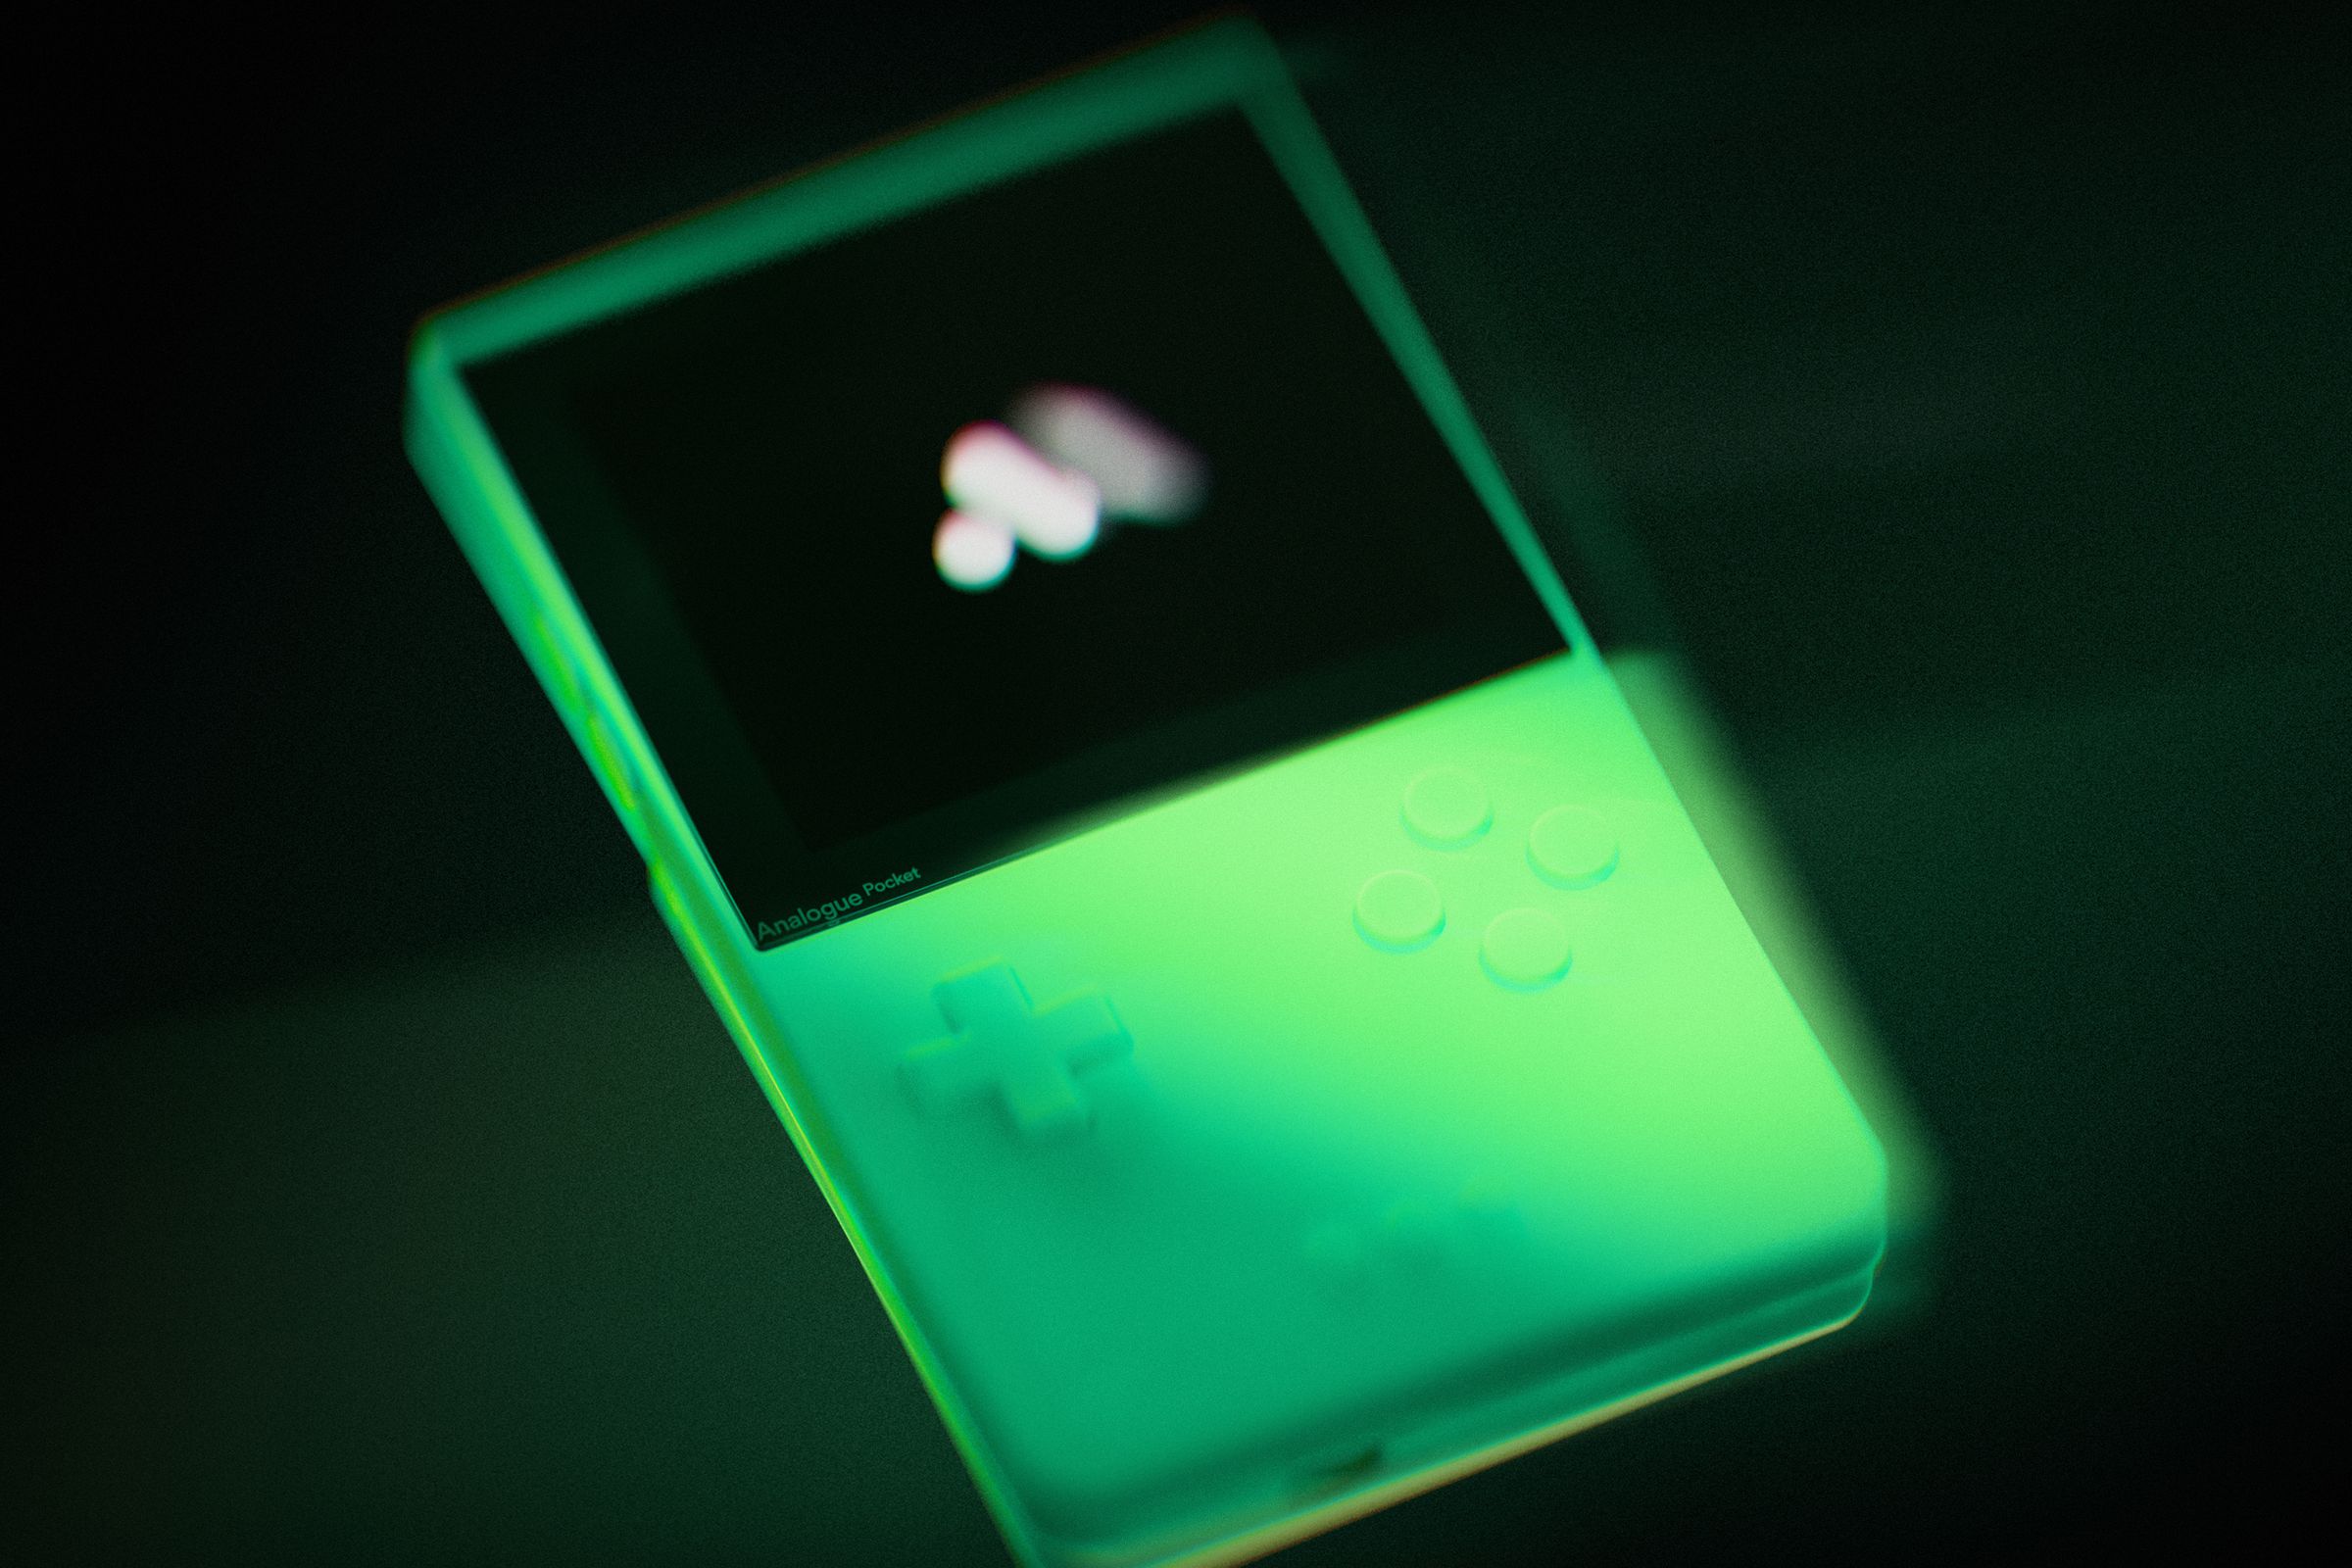 A photo of a glow in the dark Analogue Pocket gaming handheld.